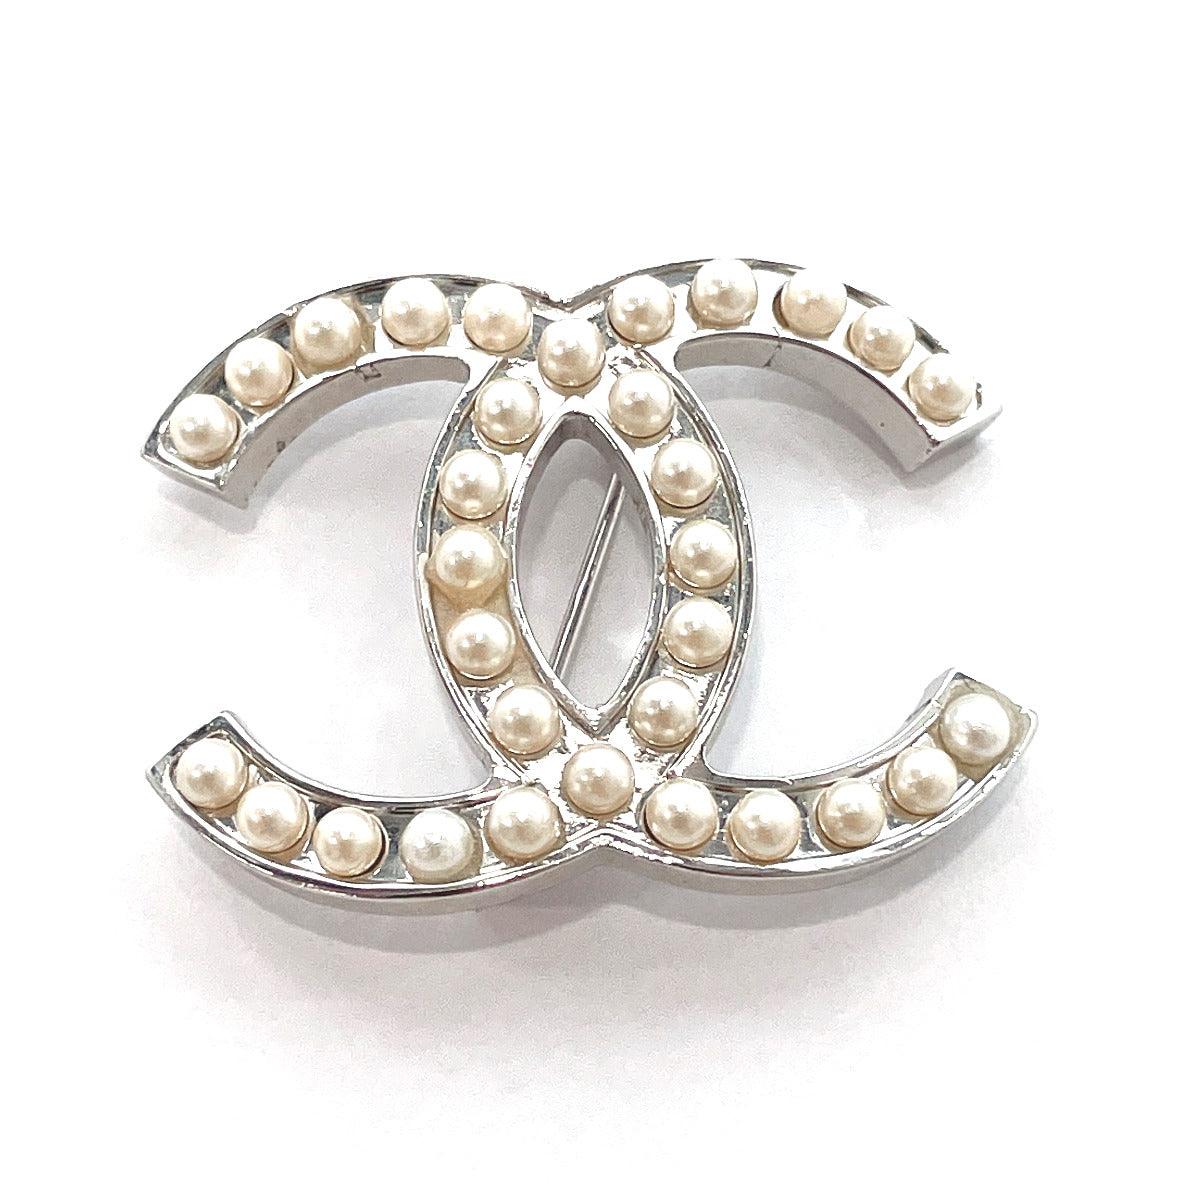 Pin & brooche Chanel Silver in Metal - 37329851